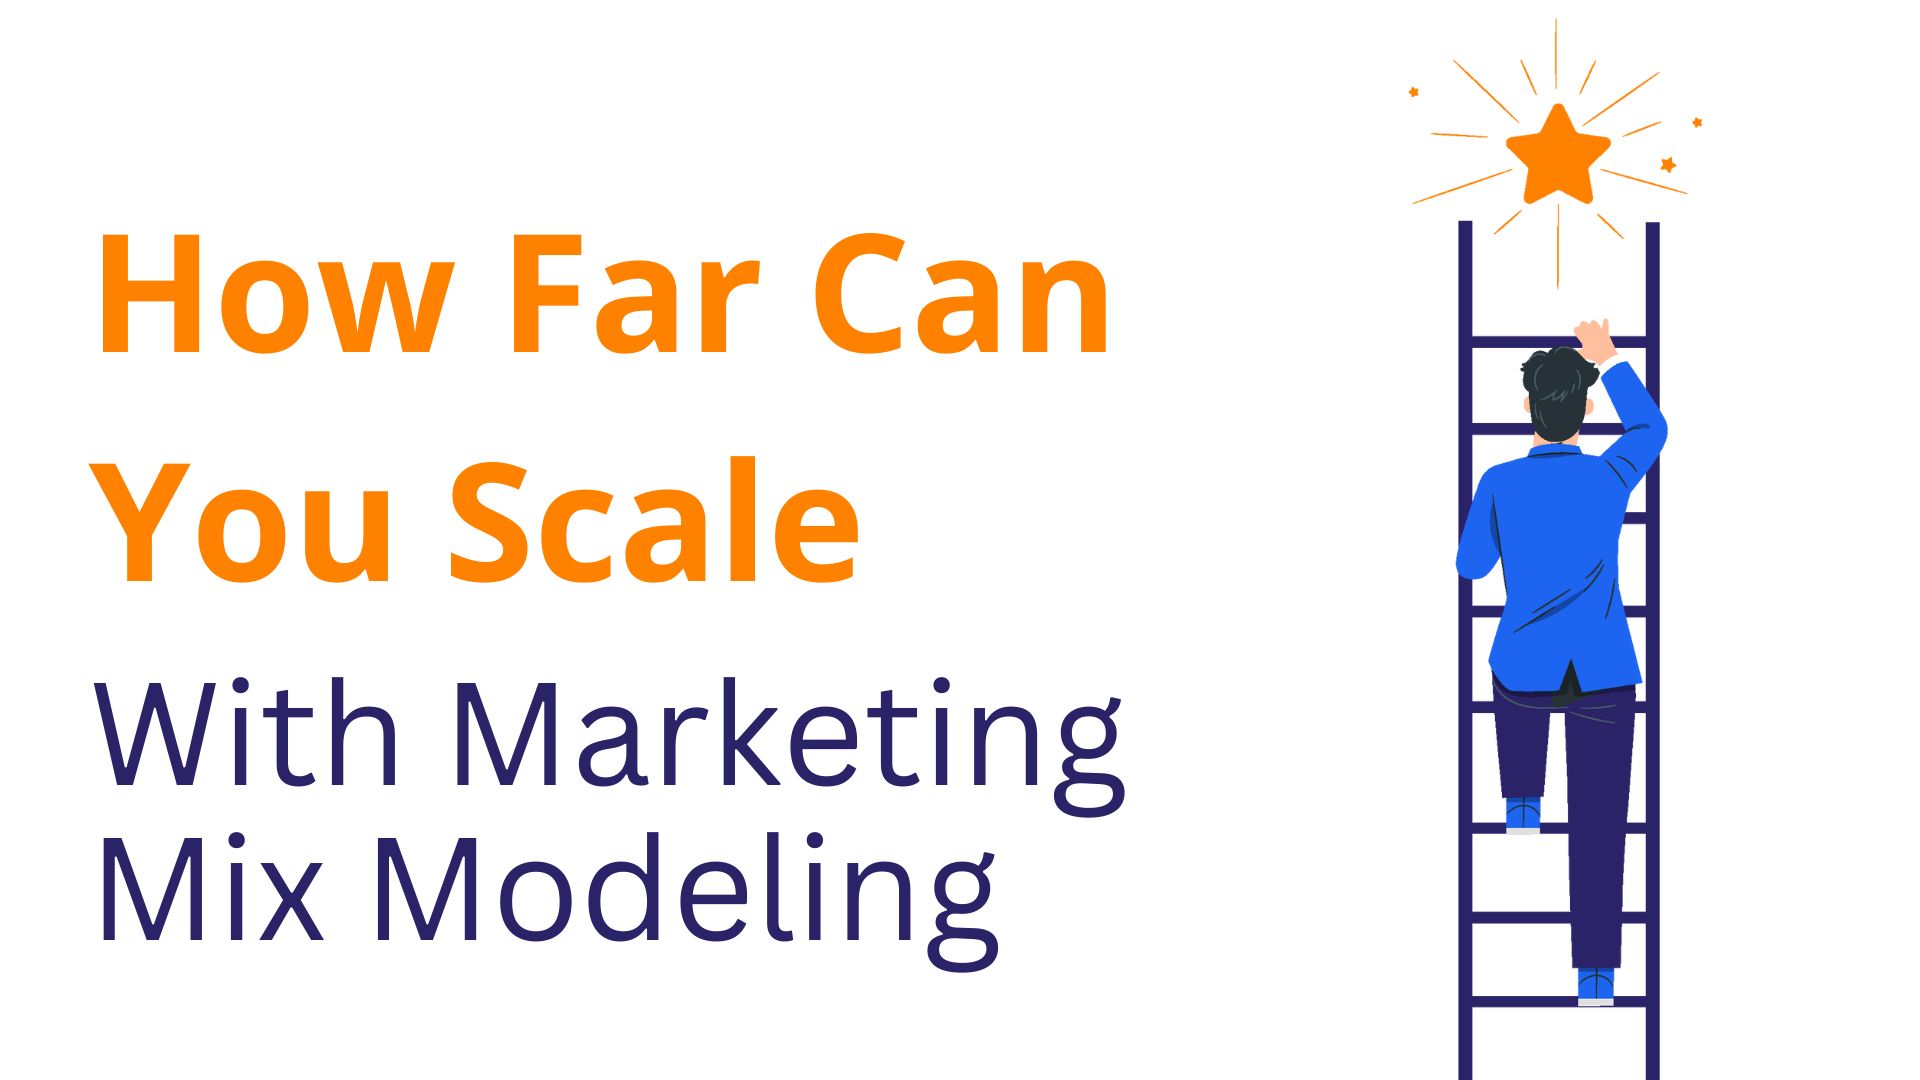 How Far Can You Scale With Marketing Mix Modeling